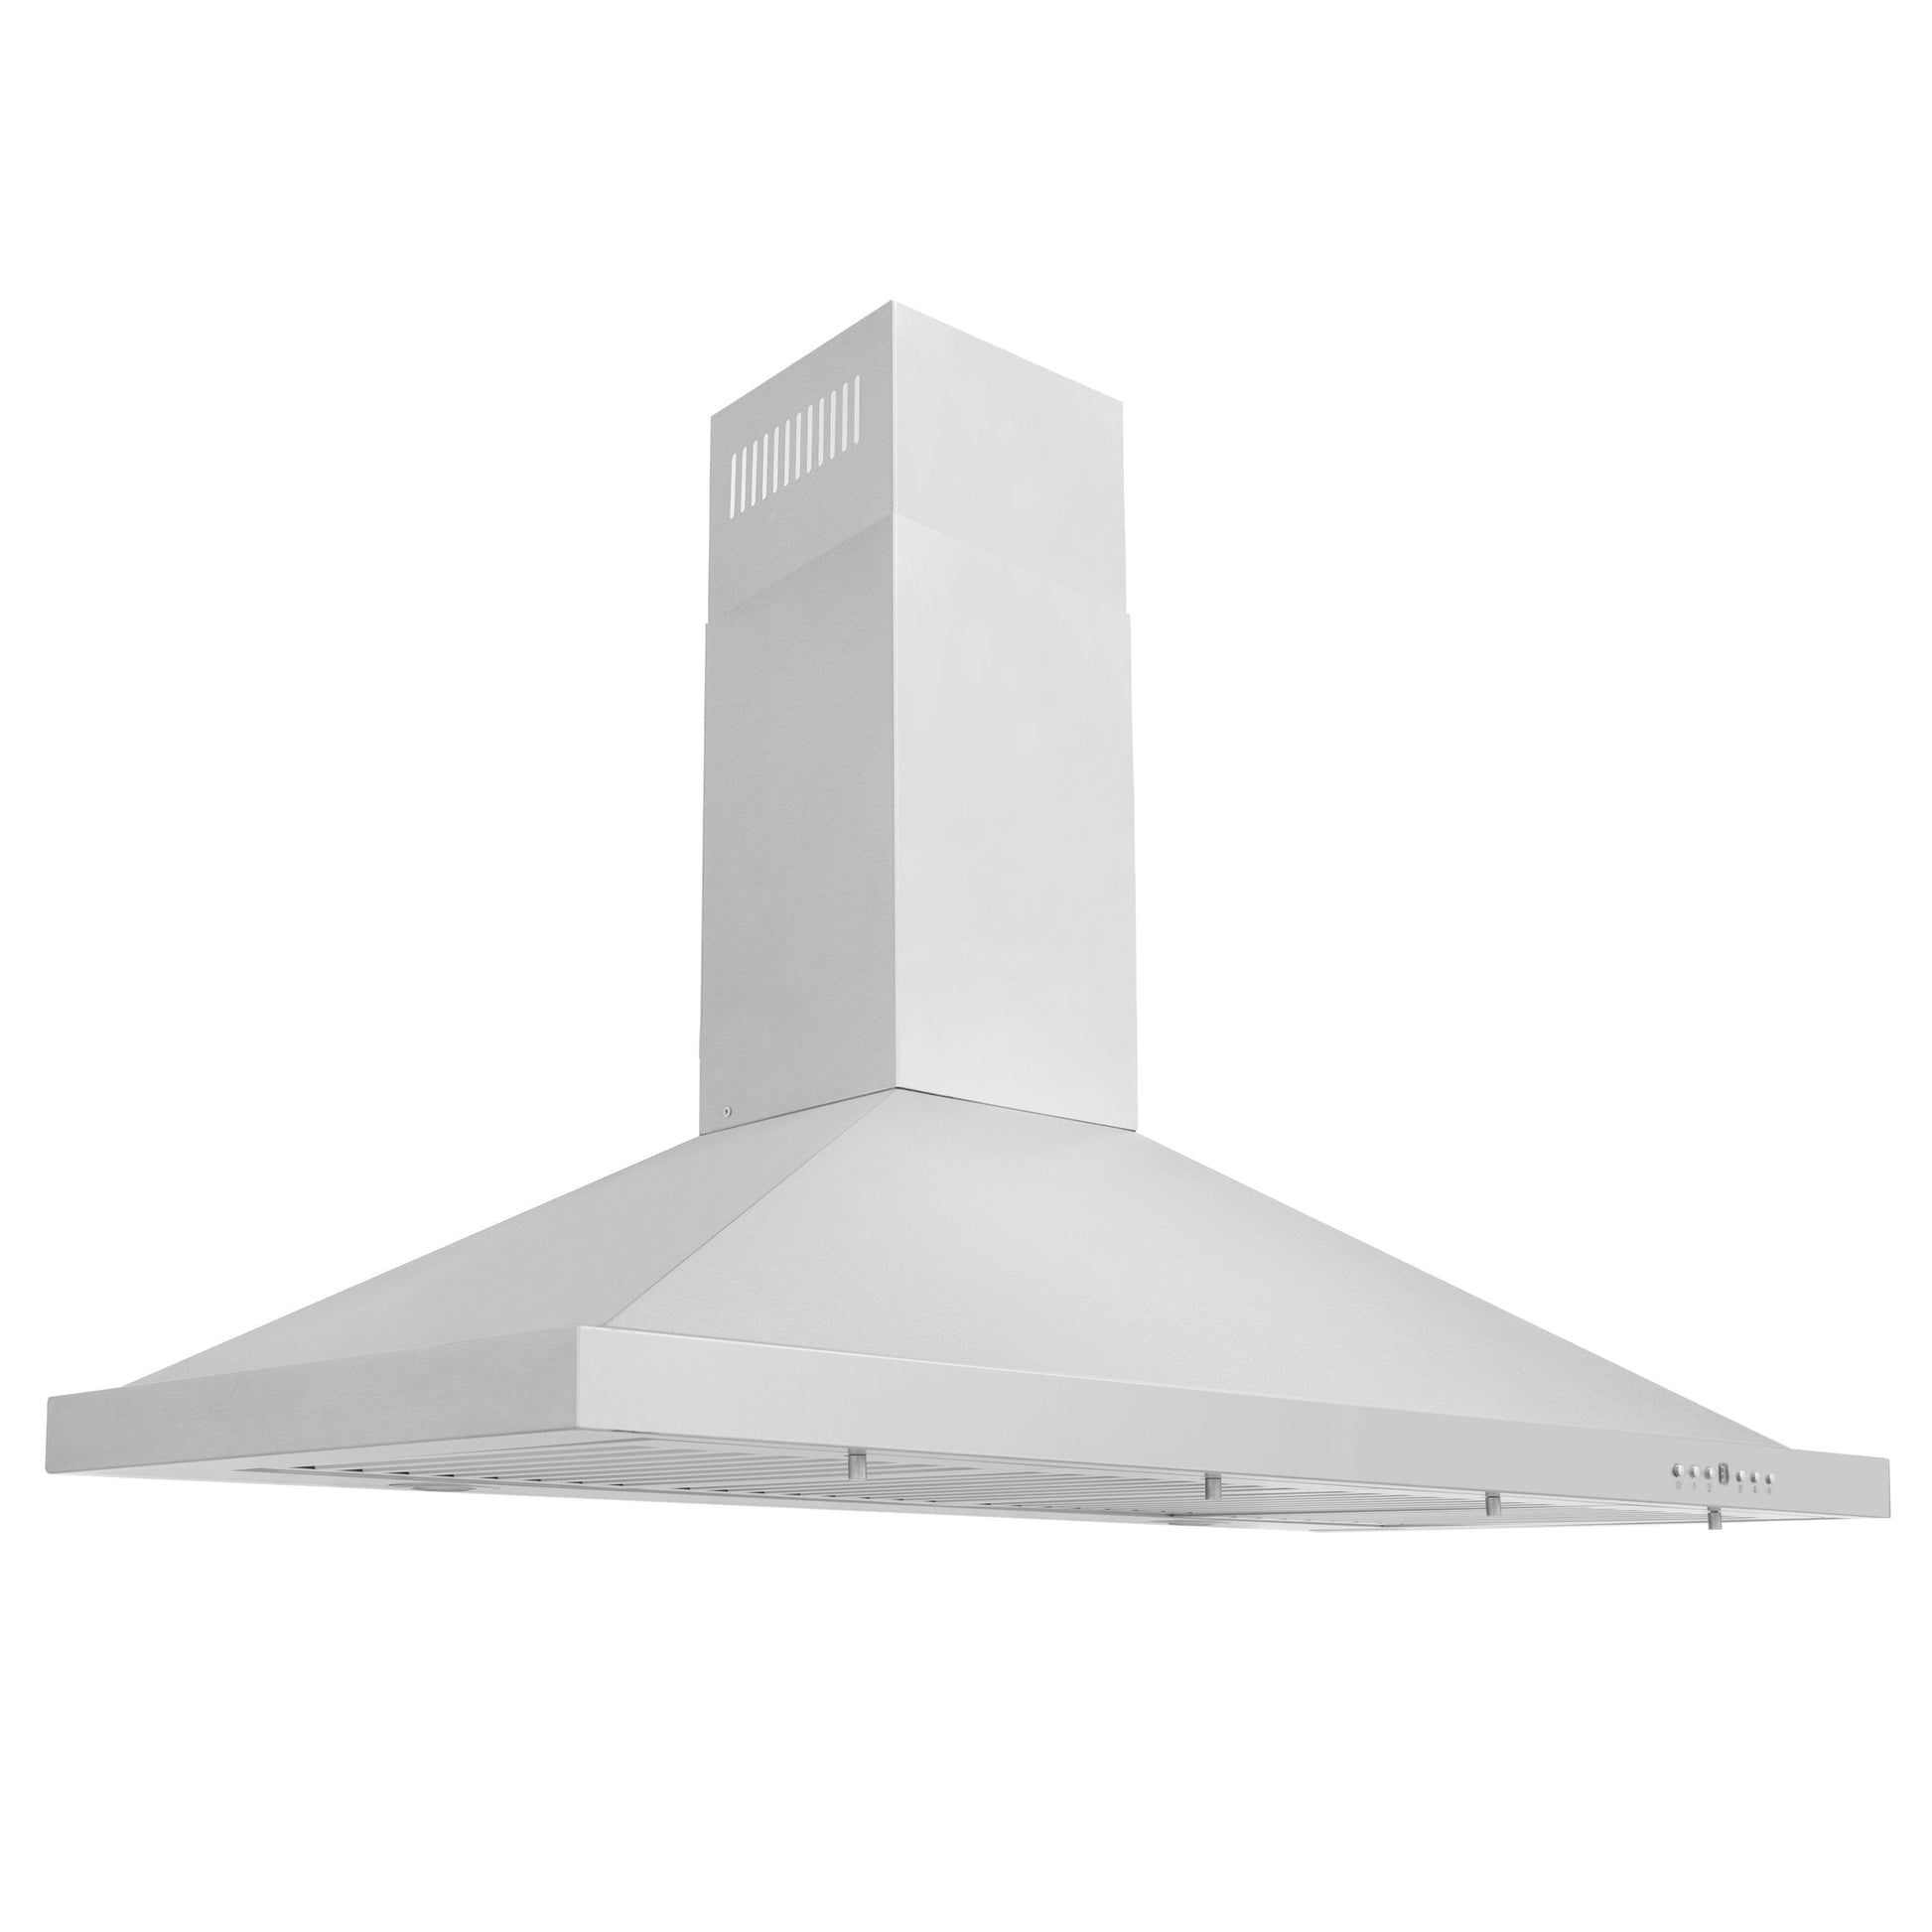 ZLINE 30" Recirculating Wall Mount Range Hood - Stainless Steel with Charcoal Filters